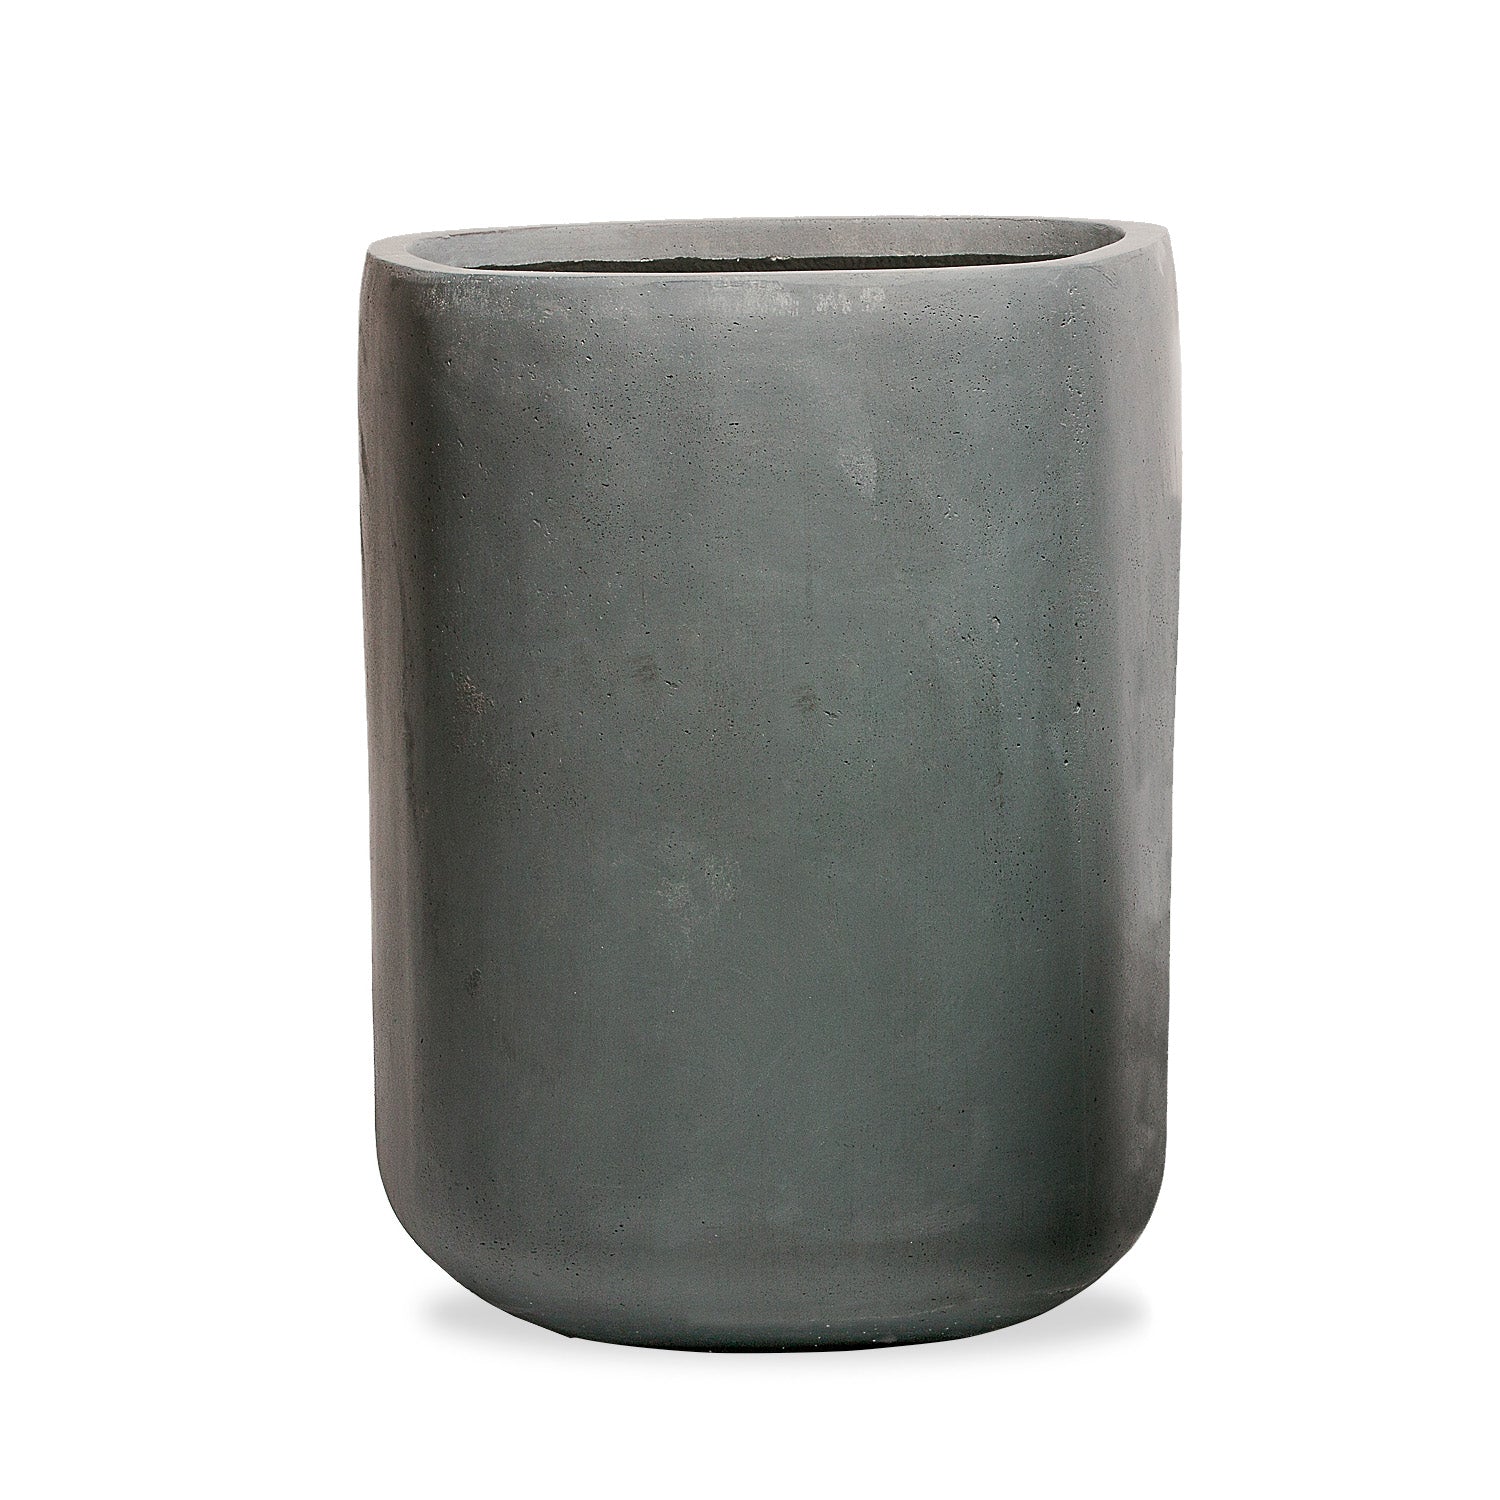 Distressed Smooth: Tombo Tall Planter Grey, LG